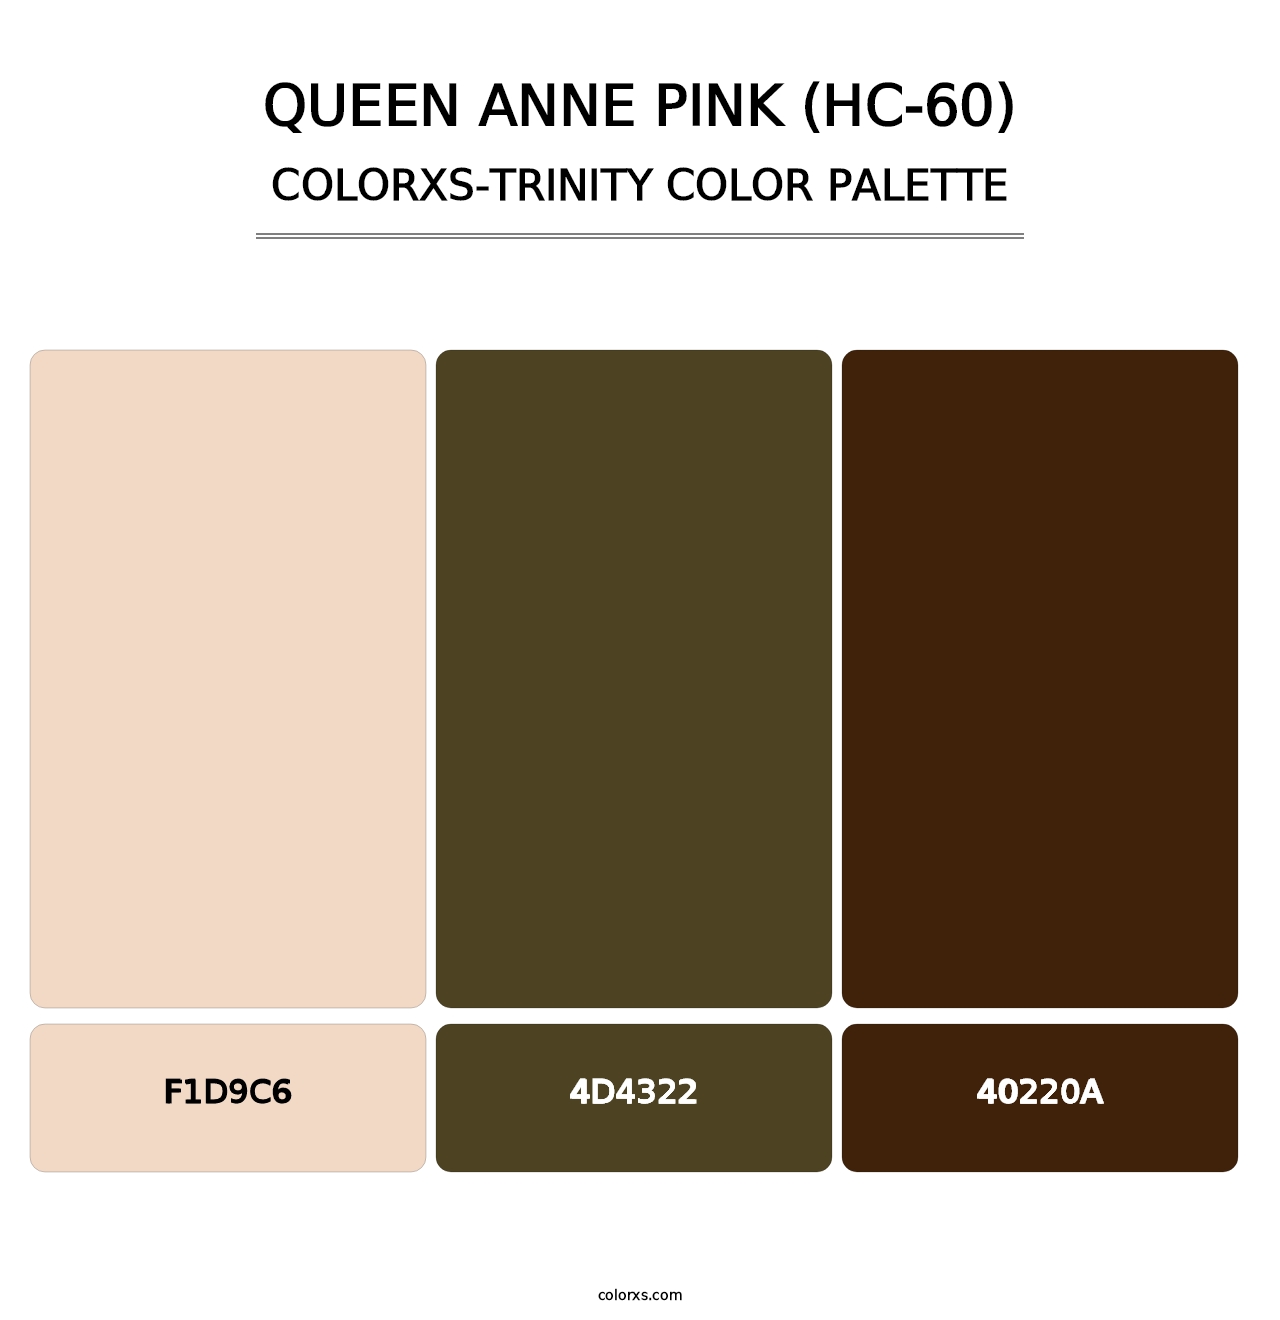 Queen Anne Pink (HC-60) - Colorxs Trinity Palette